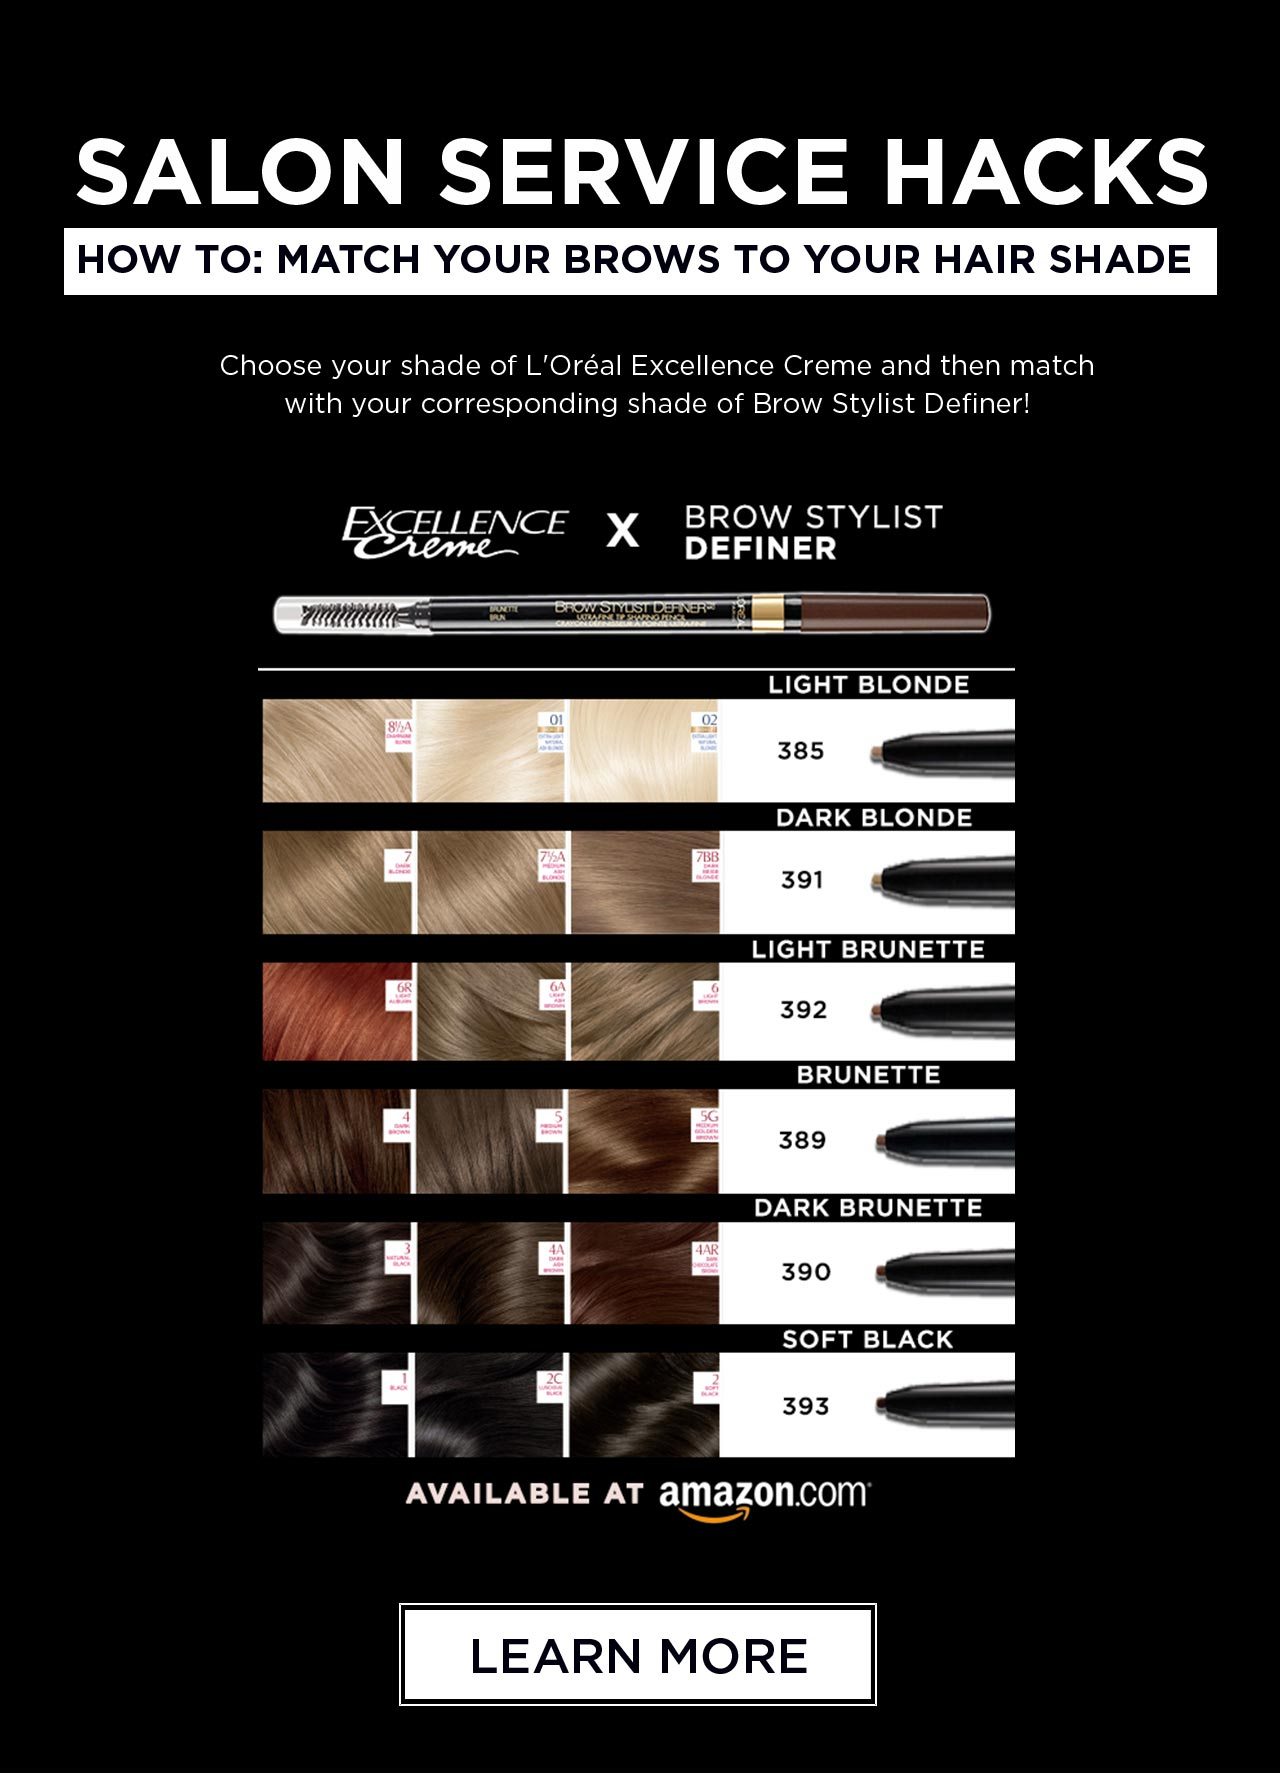 How to: Match your brows to your hair shade - Learn More